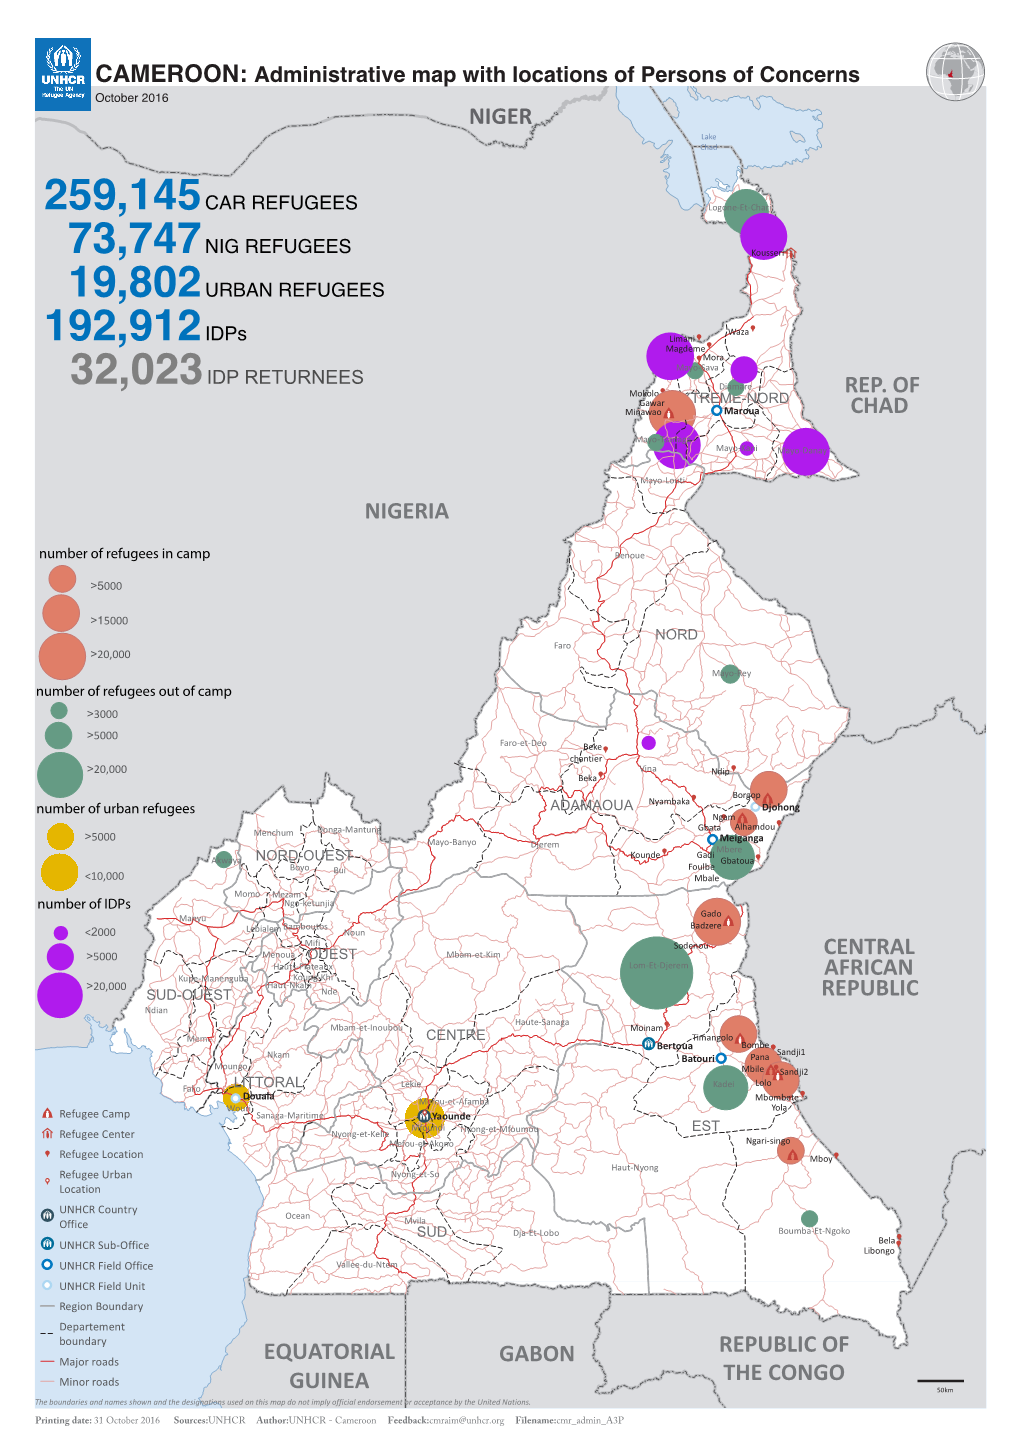 Cameroon: Administrative Map with Locations of Persons of Concerns; October 2016